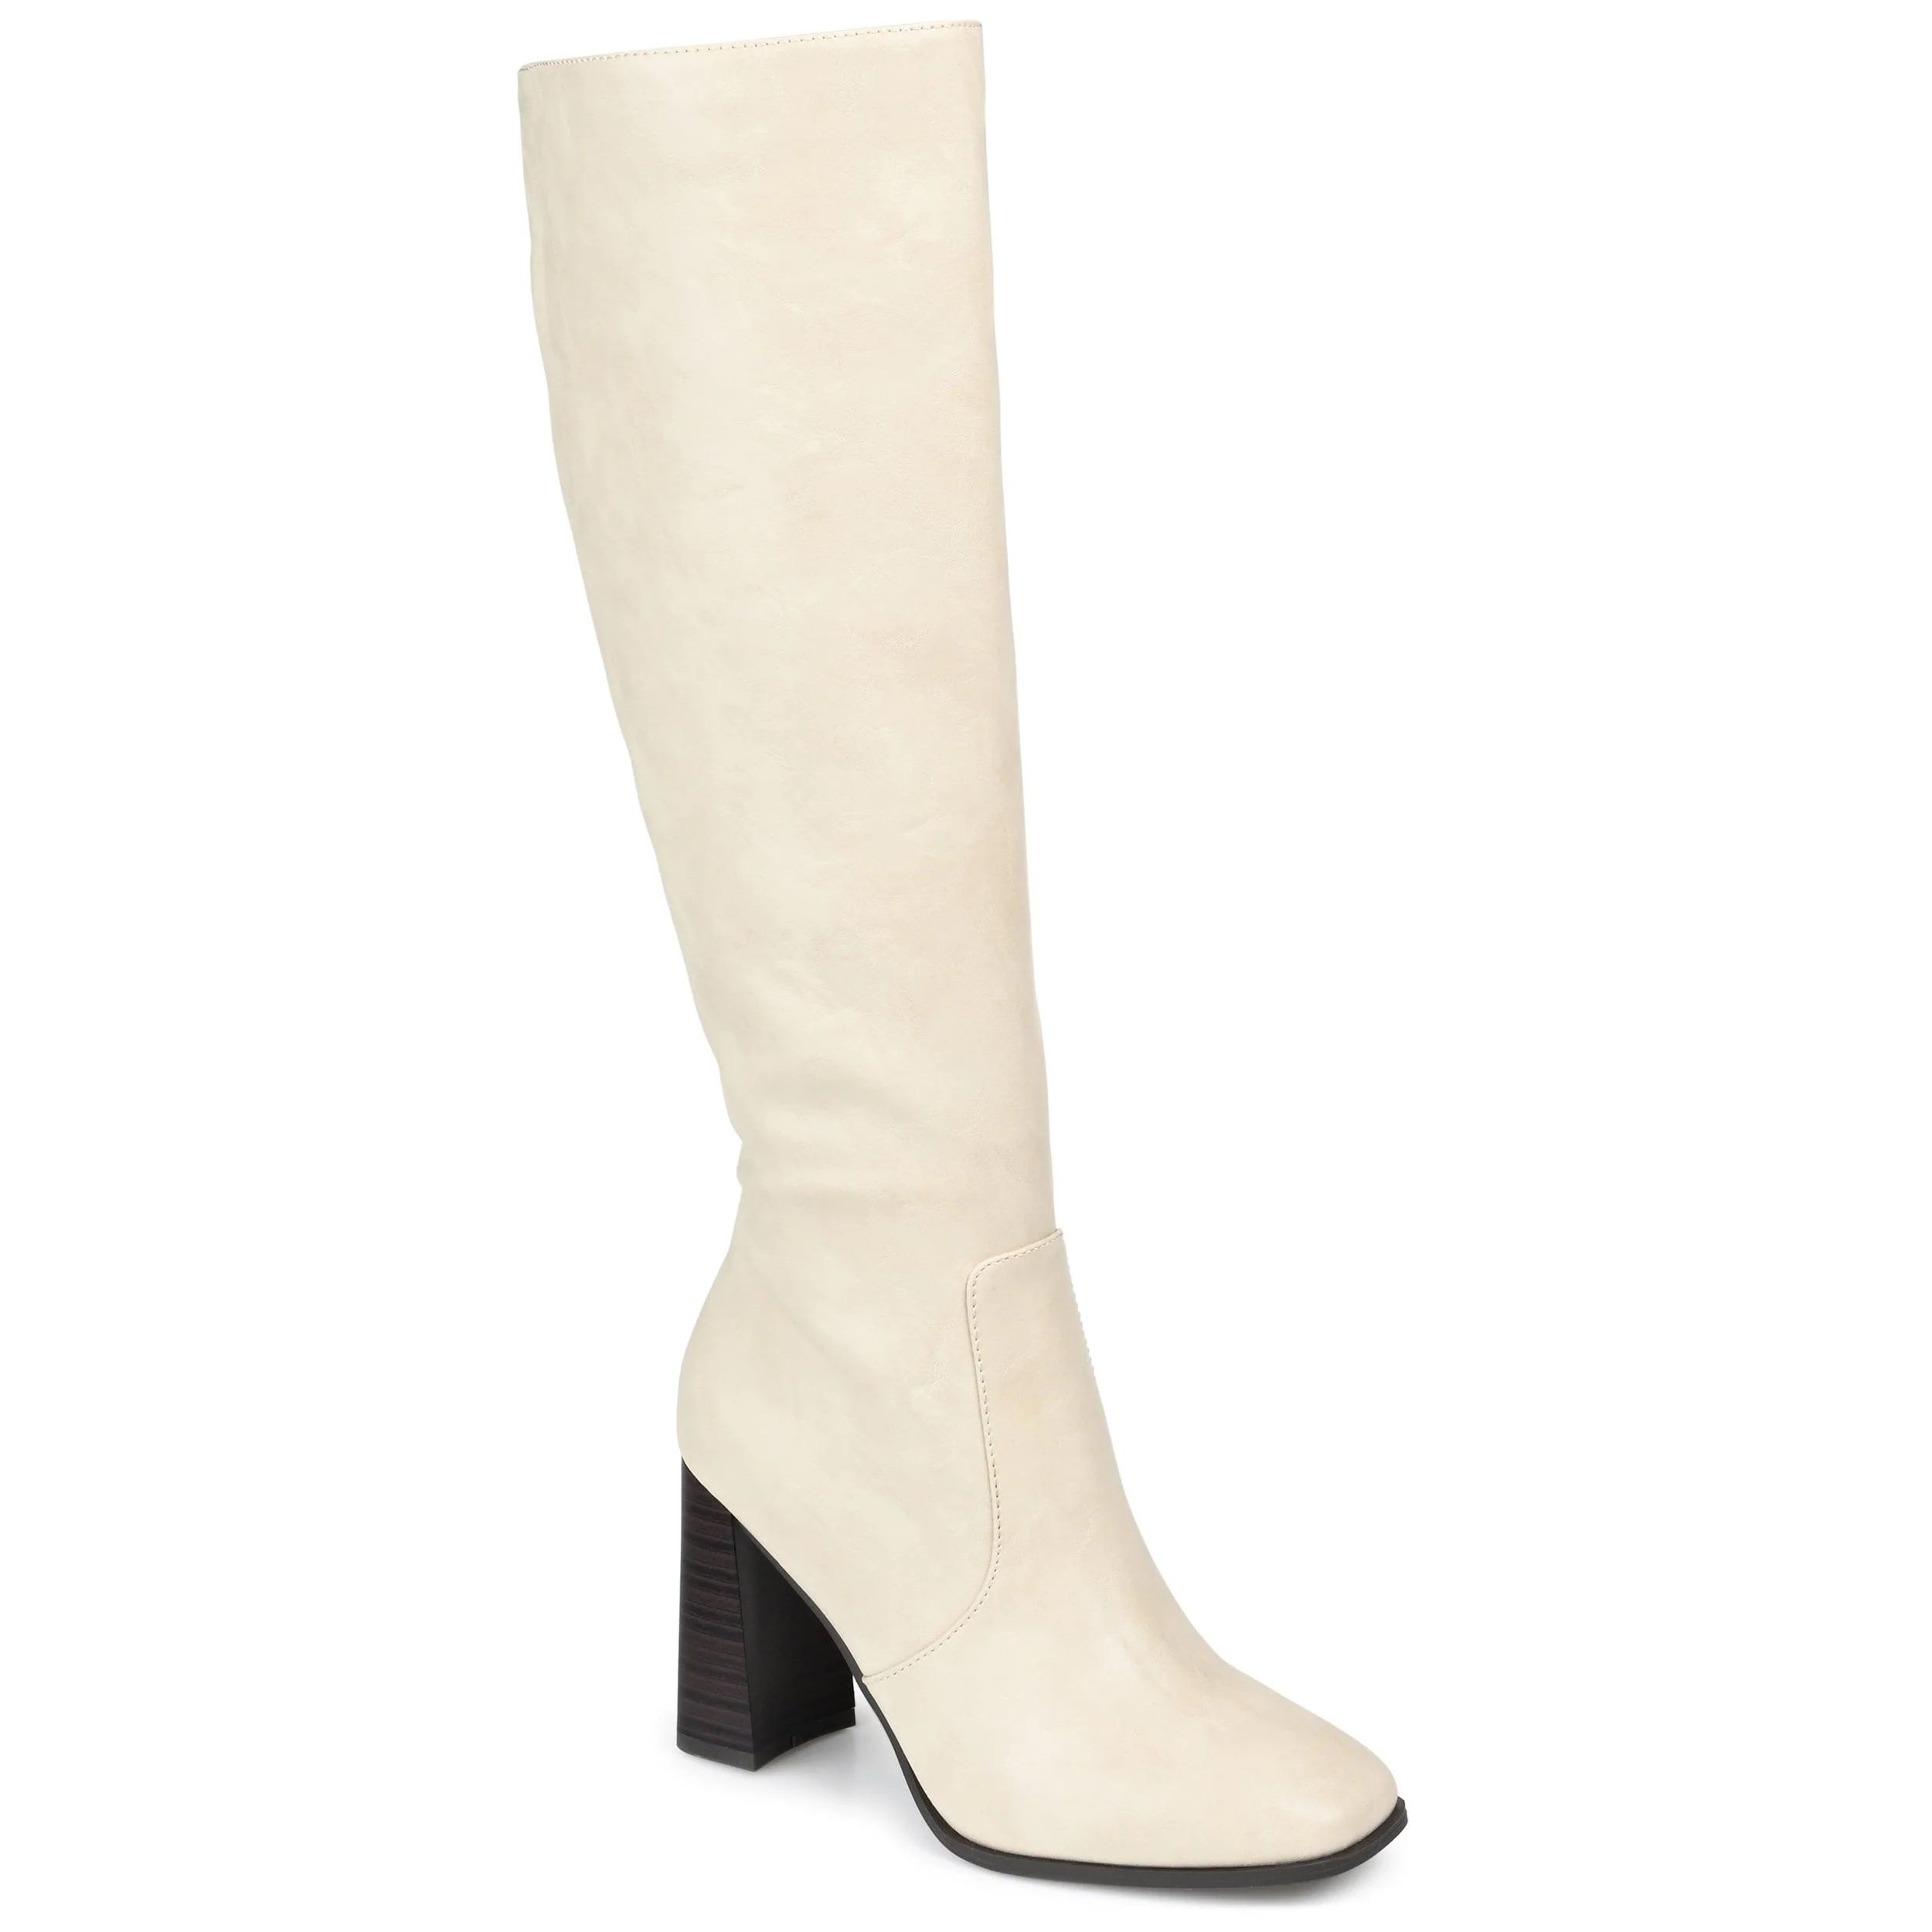 KARIMA EXTRA WIDE CALF | Journee Collection